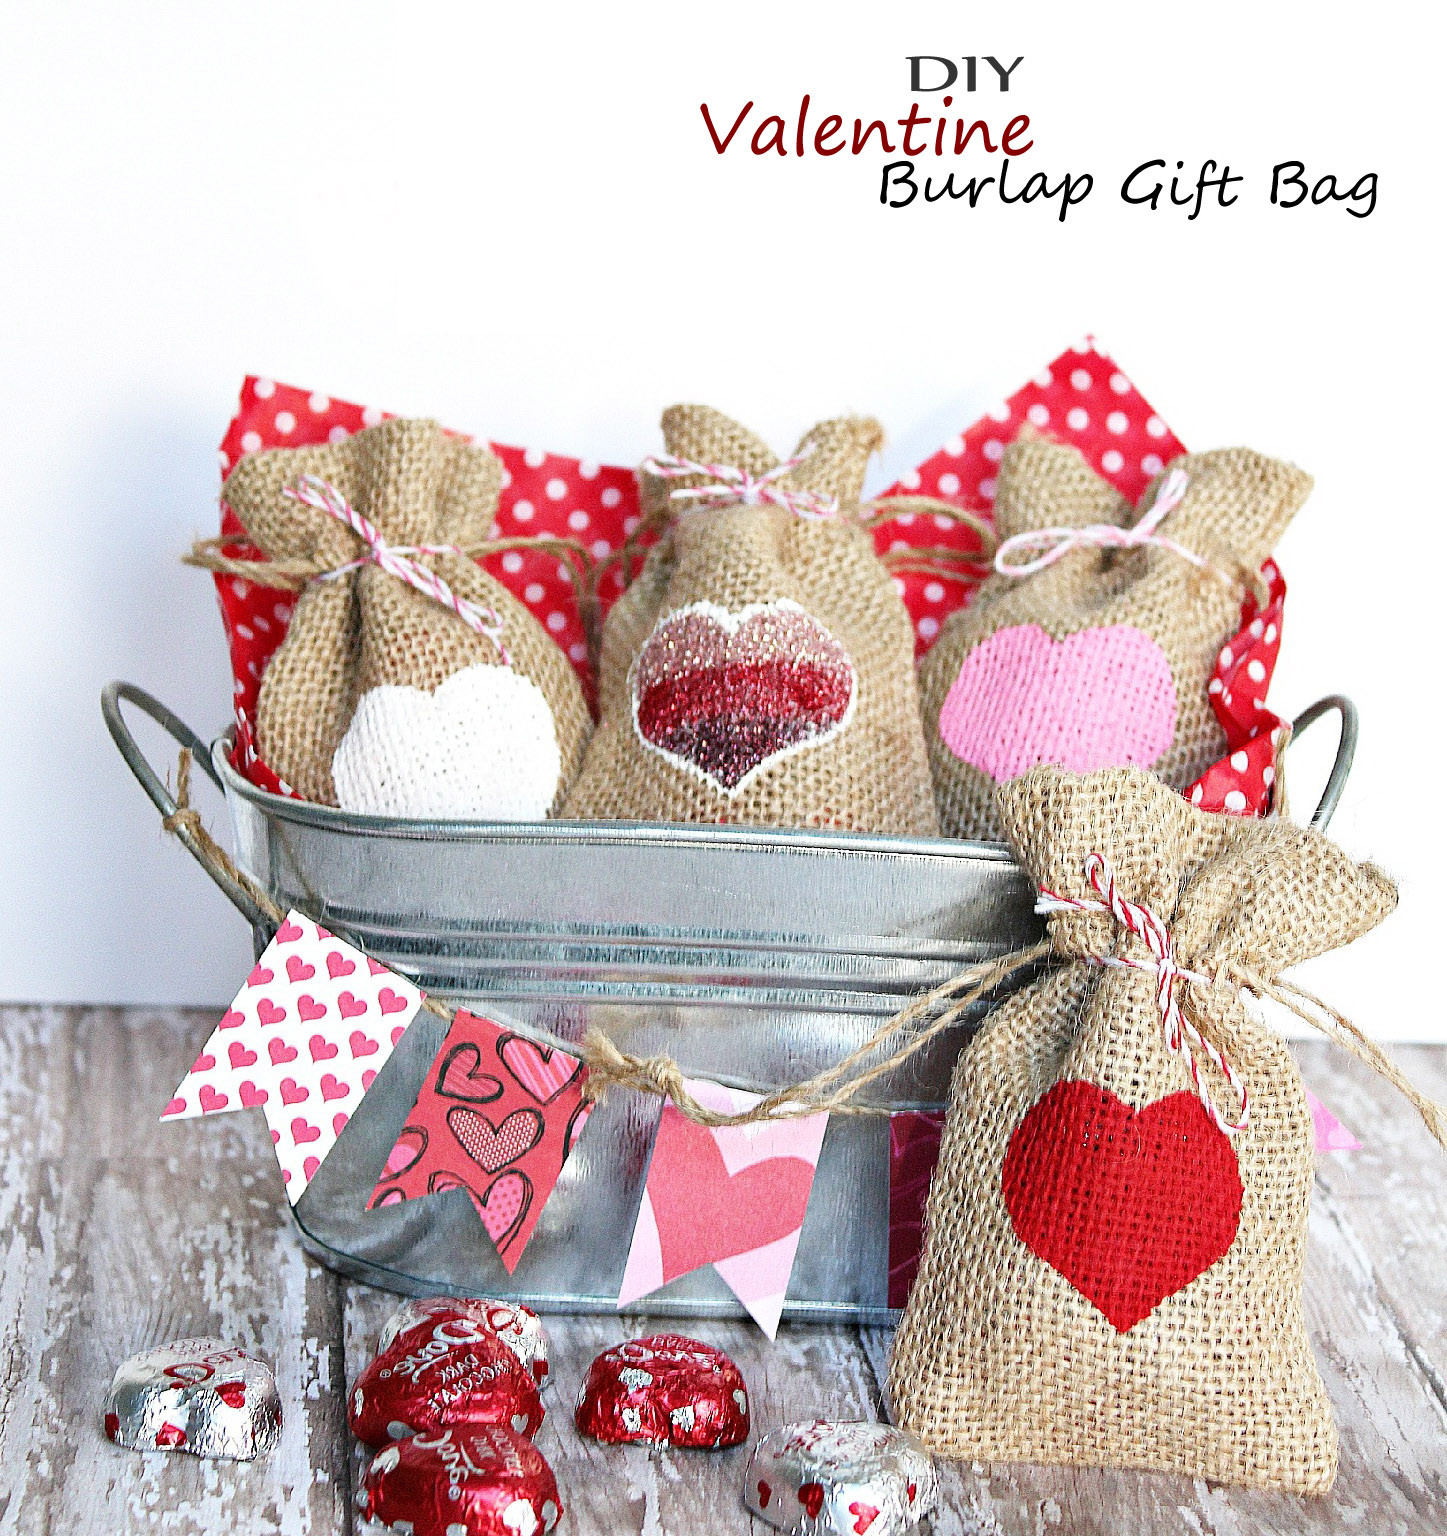 Crafts For Christmas Gifts
 Valentine Burlap Gift Bag – Easy Homemade Holiday Kid